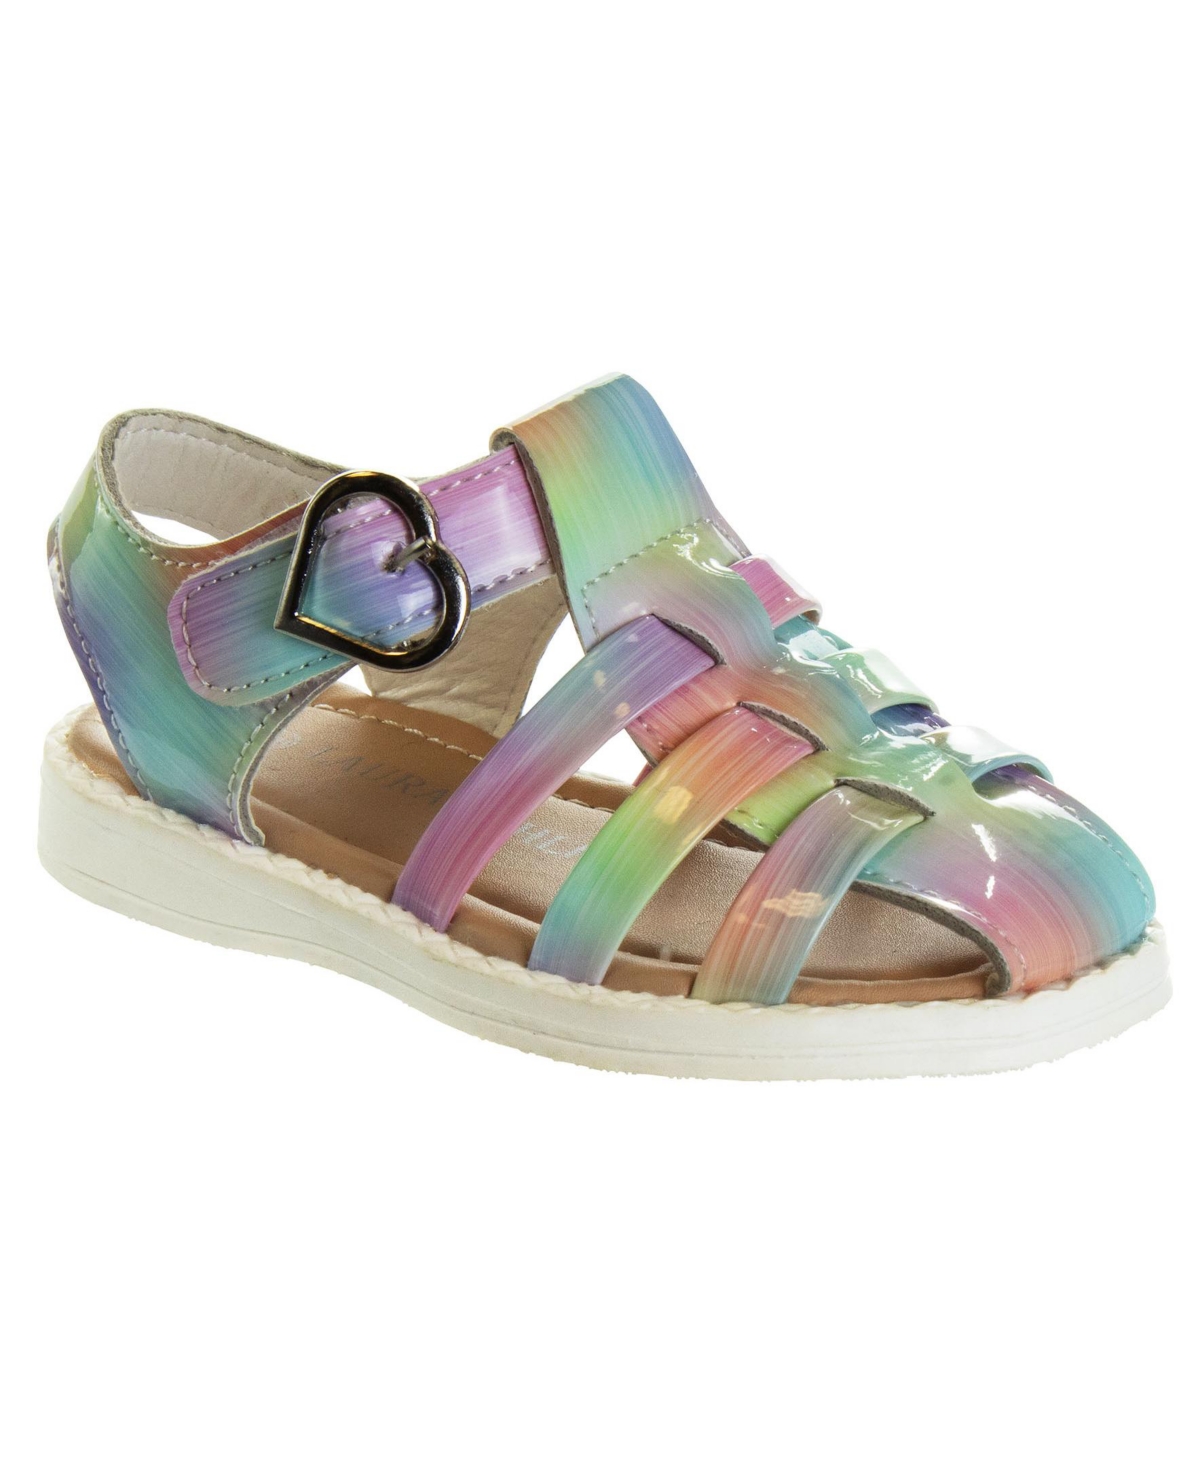 Laura Ashley Kids' Toddler Girls Heart Shaped Buckle Closure Closed Toe Sandals In Light Multi